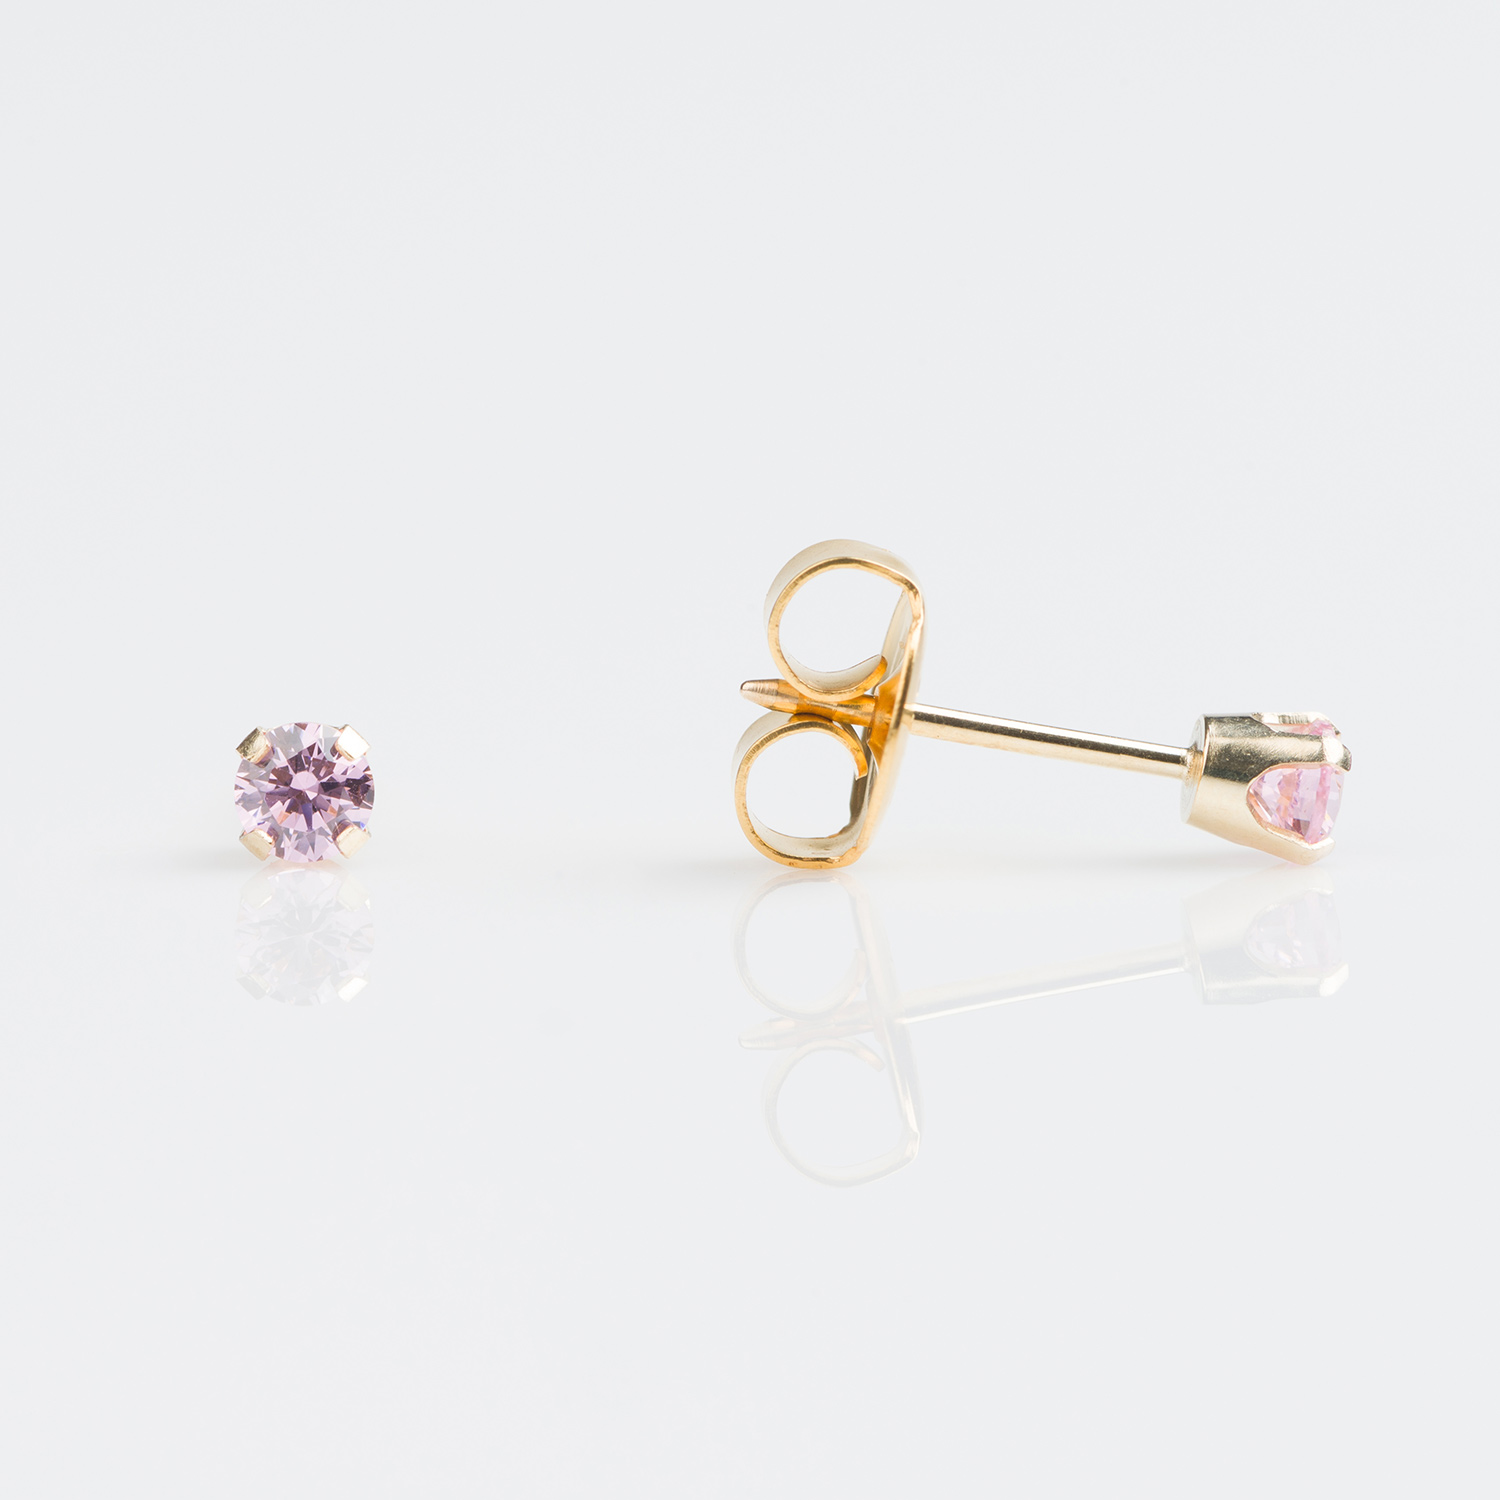 TT-744 – Studex Tiny Tips Gold Plated Tiff. 3mm Pink Cubic Zirconia Stud Earrings